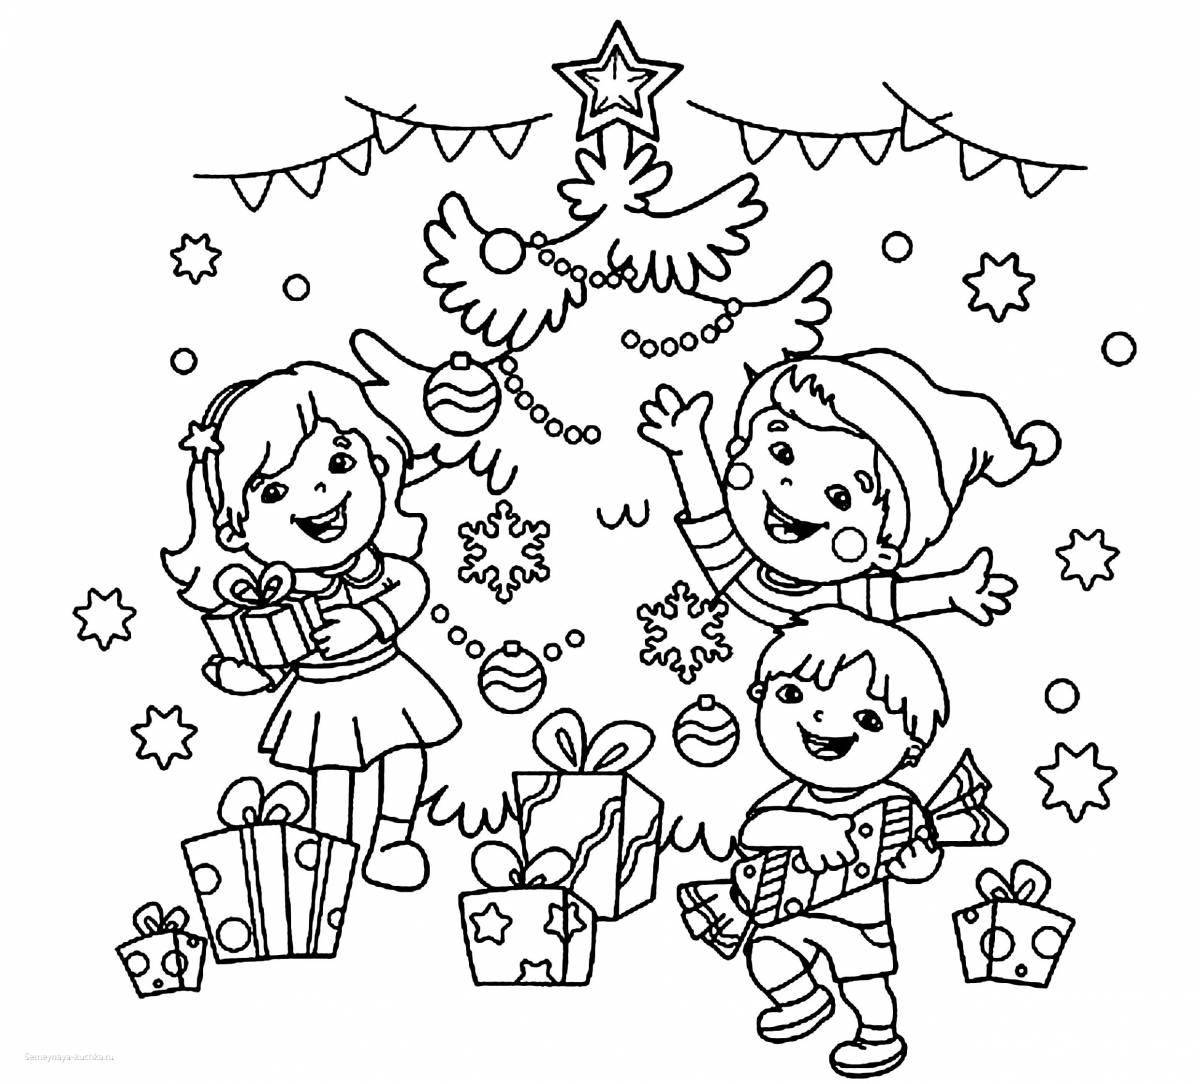 Coloring page wild dance around the tree